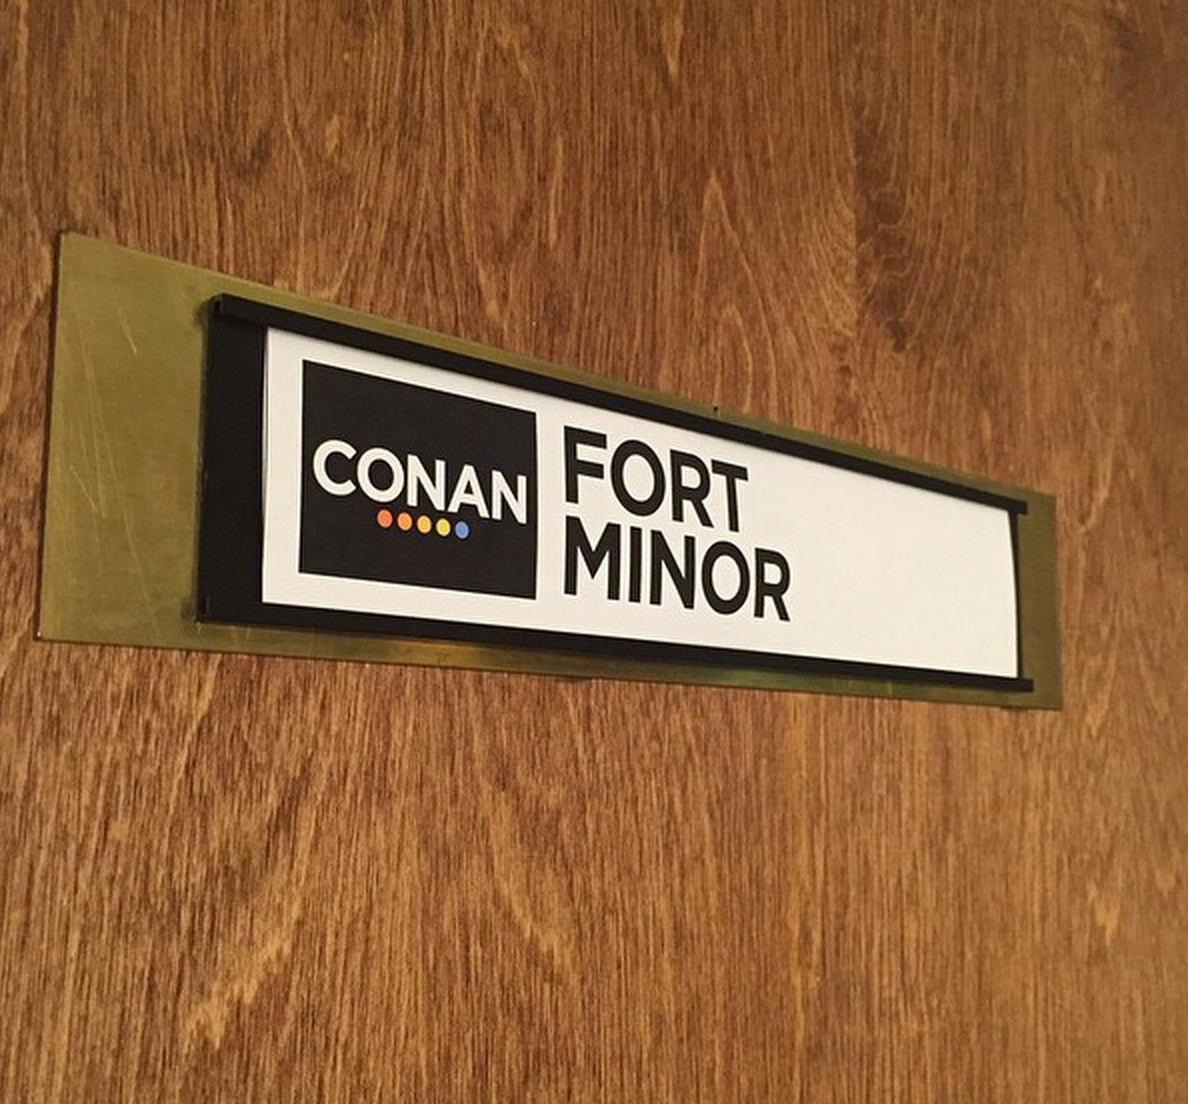 RT @fortminor: Catch #FortMinor perform LIVE on @TeamCoco tonight at 11/10C - http://t.co/eDnNeL9rWQ #WelcomeFM http://t.co/g4zqs7cGED